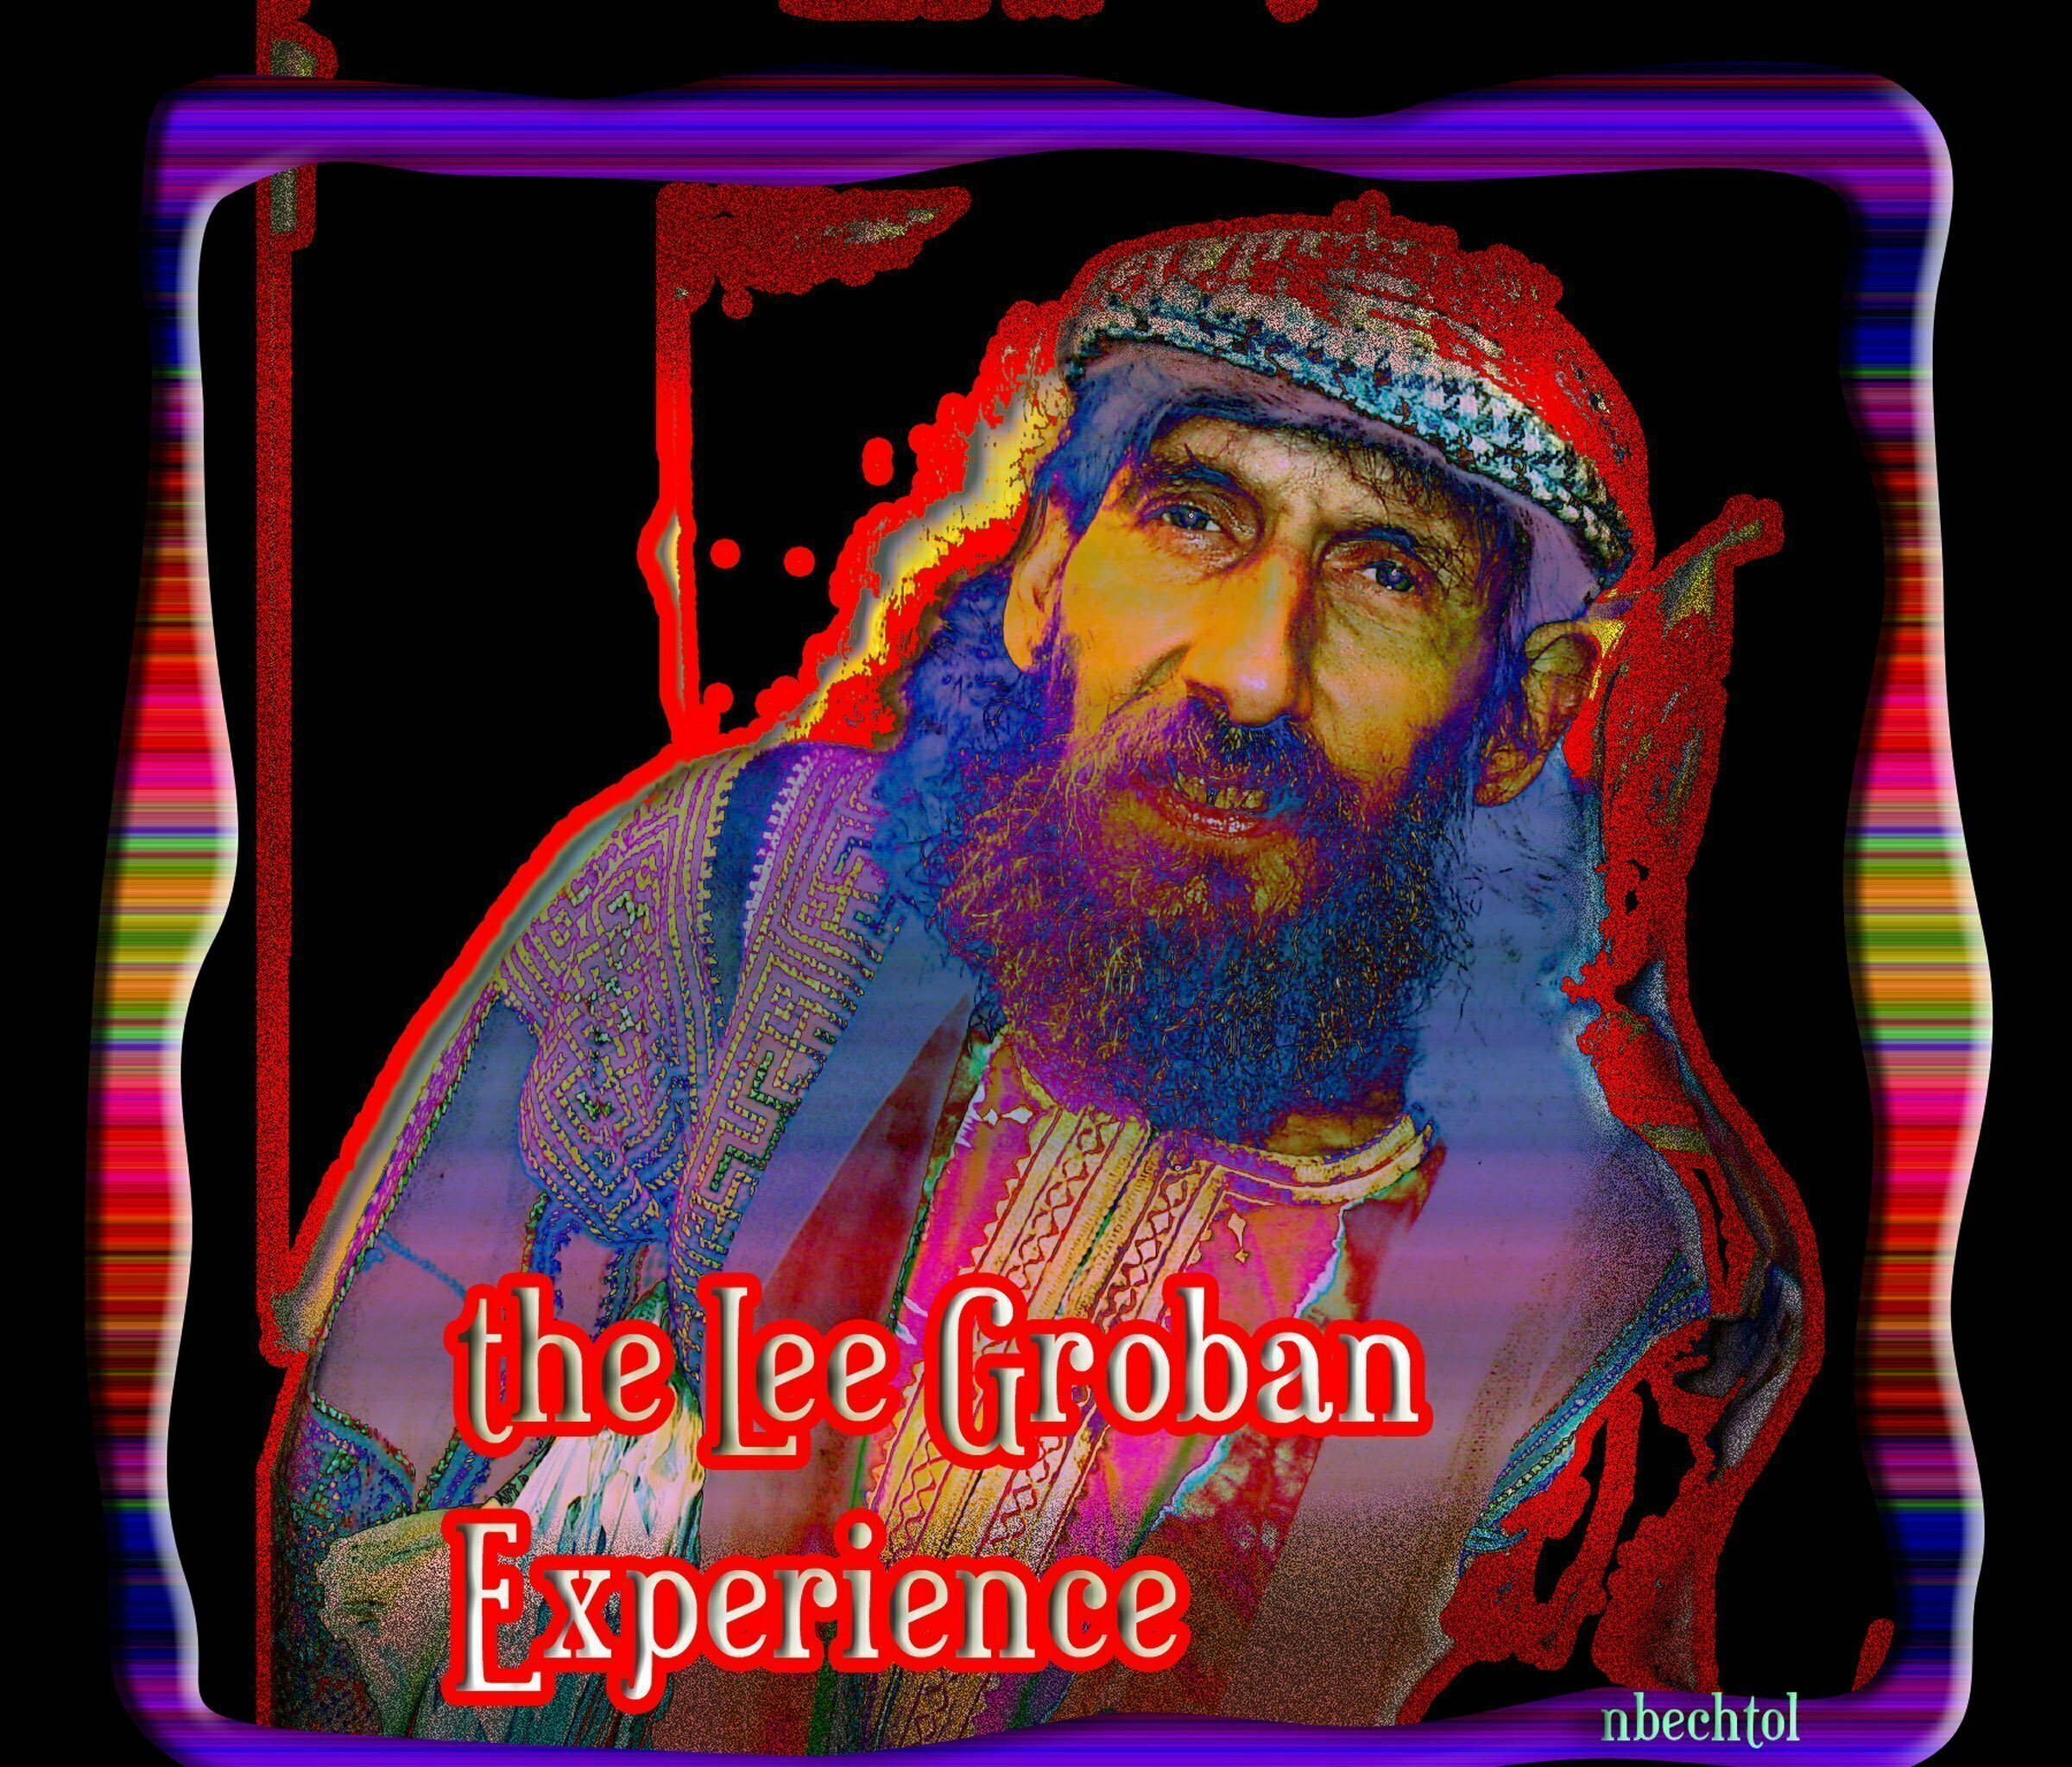 Nancy Bechtol; Lee Groban Experience, 2018, Original Photography Other, 11 x 17 inches. Artwork description: 241 digital painting expressionistic  Poster boy  print archival Epson inks and paper.  various sizes.  Request.  ...